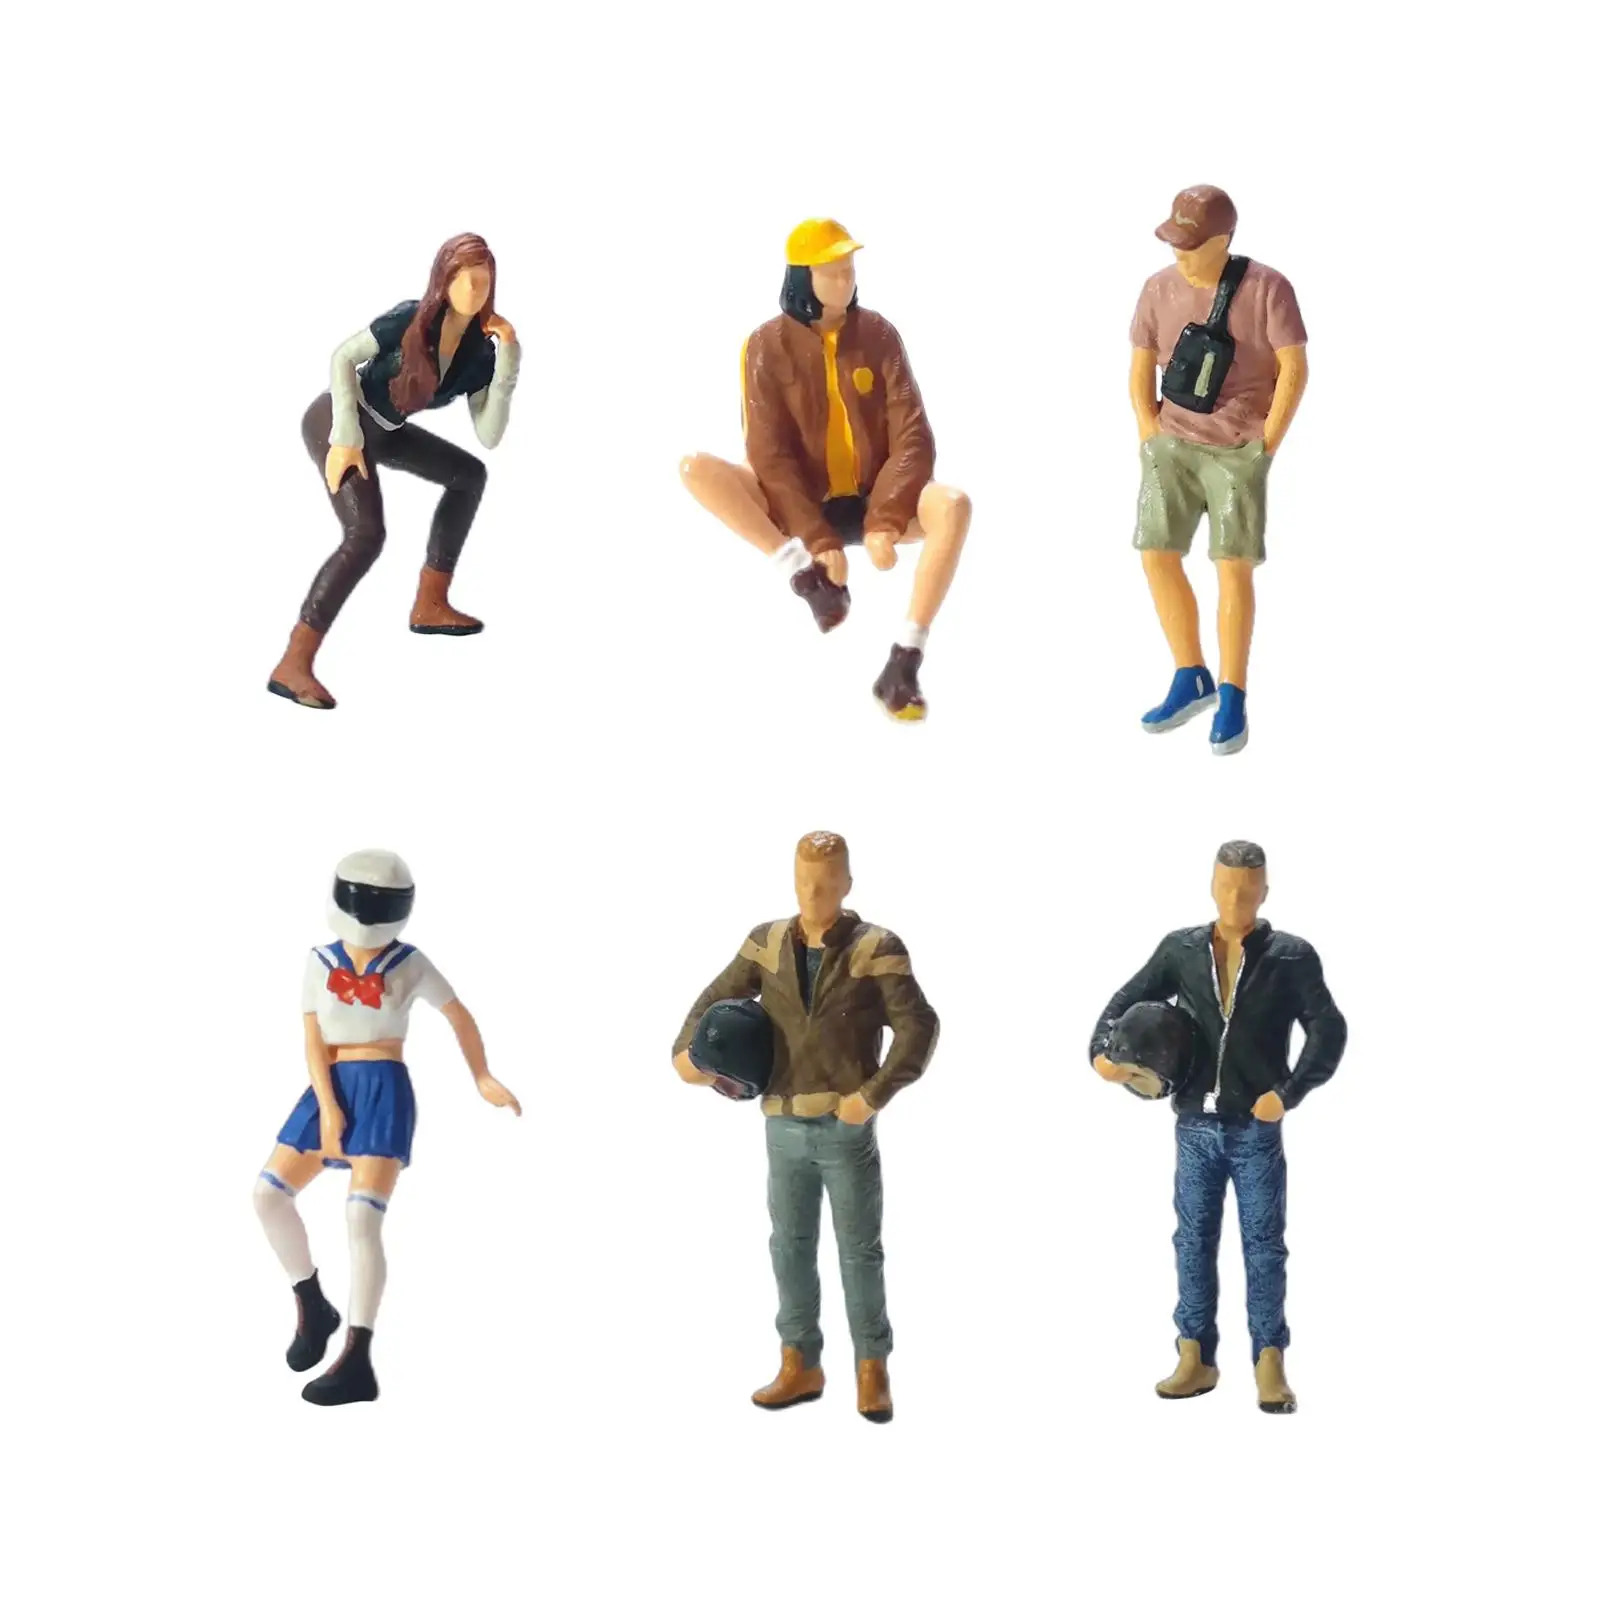 1/64 Model People Figures Ornament Miniature People Model 1/64 Scale Model Figures Miniature Scenes Decor DIY Projects Accessory